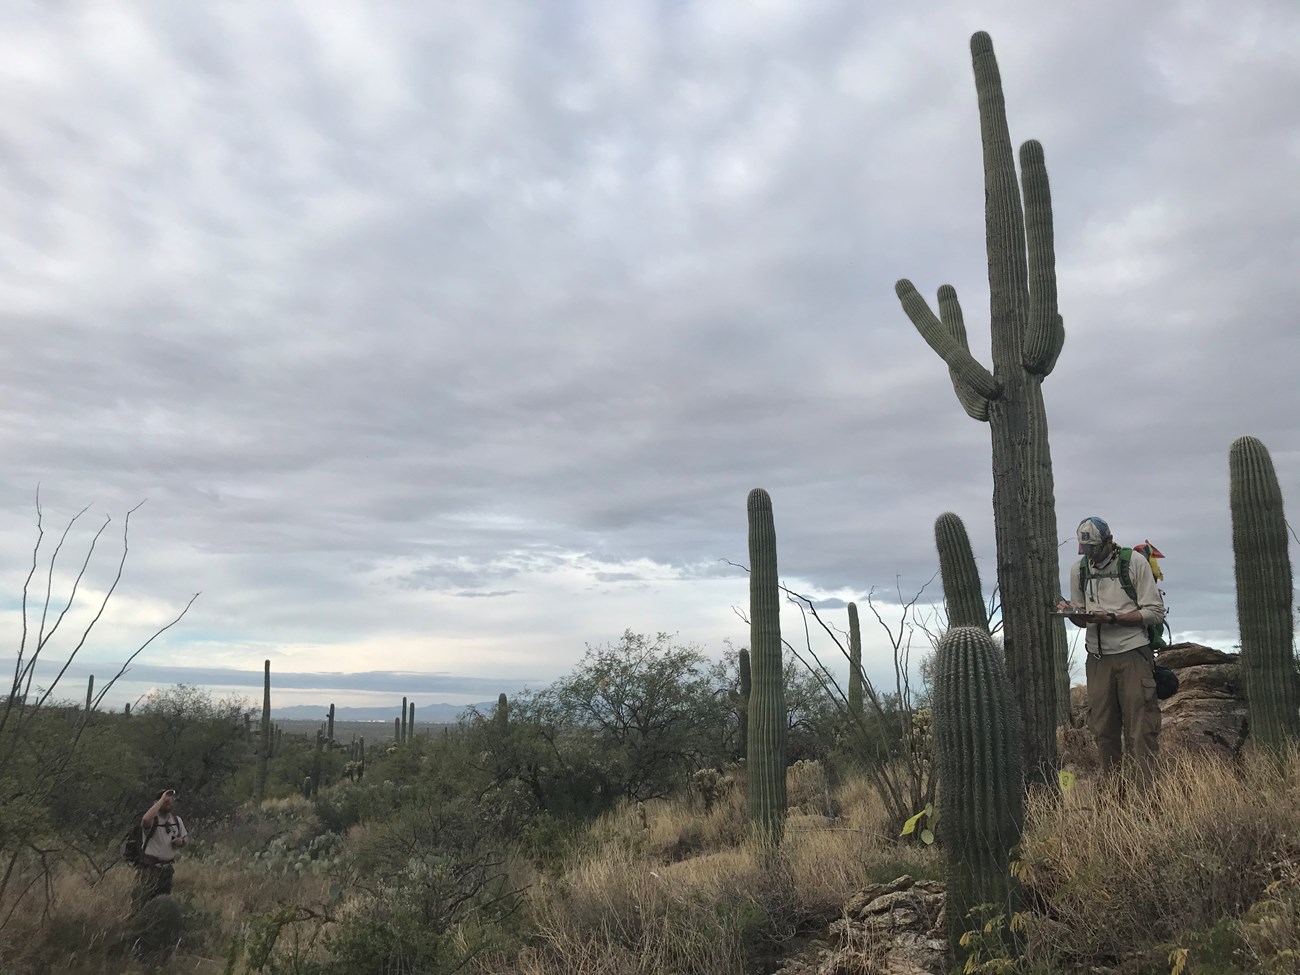 Two men working together to find the height of a tall saguaro. One is using a clinometer to find the height and the other one is next to the saguaro to take down data.